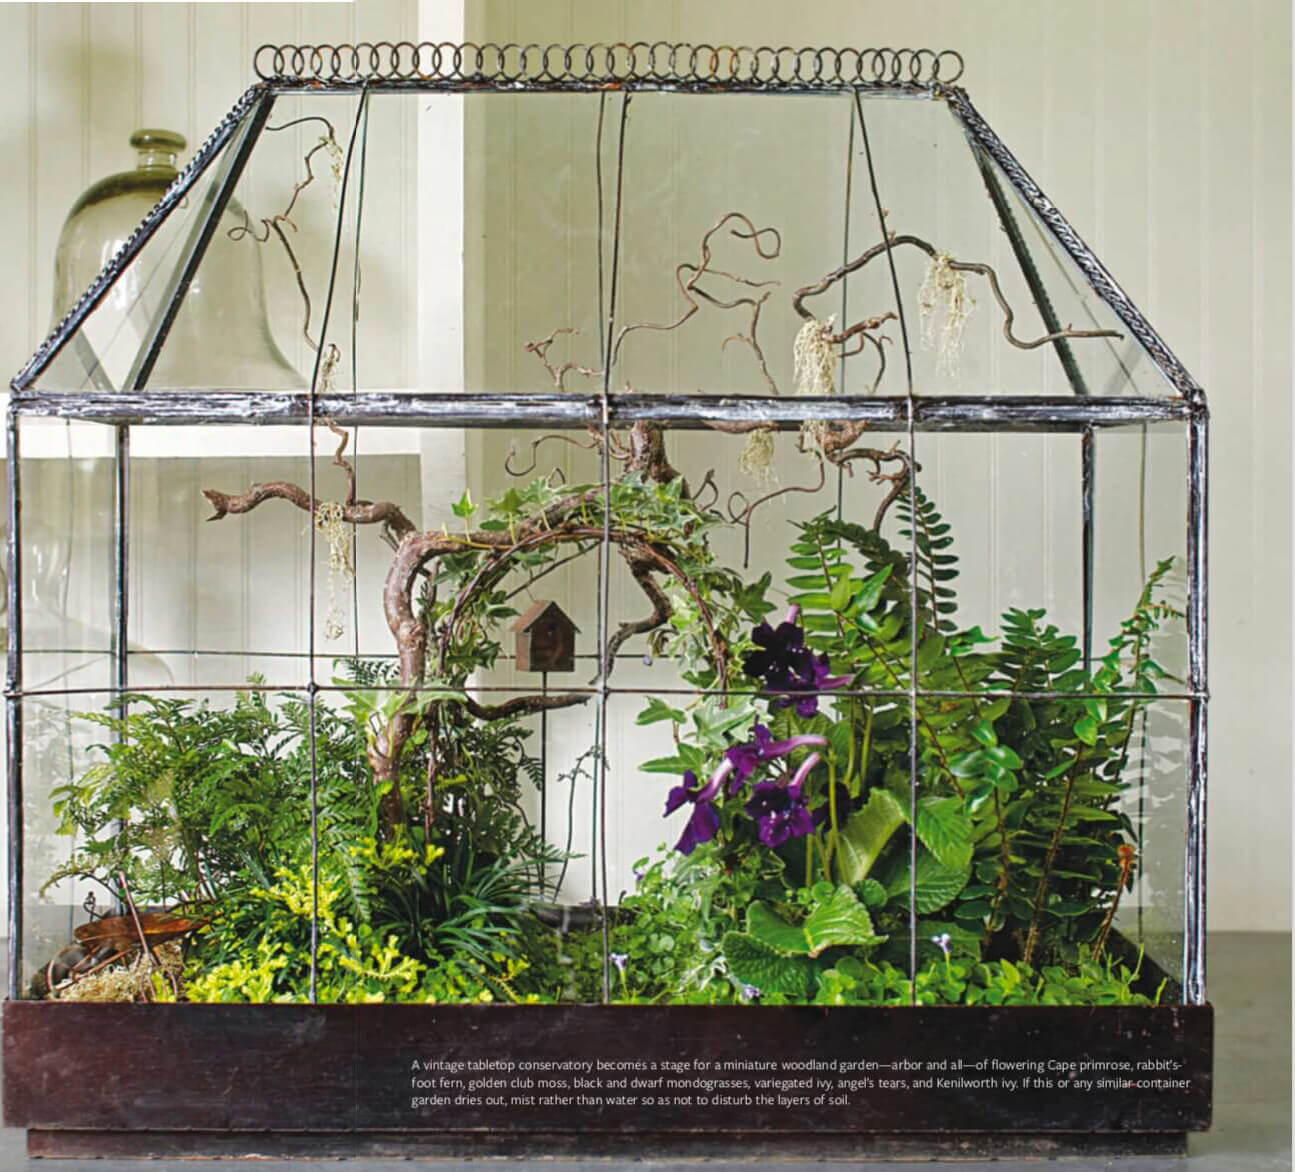  A vintage tabletop conservatory becomes a stage for a miniature woodland garden—arbor and all—of flowering Cape primrose, rabbit’s- foot fern, golden club moss, black and dwarf mondograsses, variegated ivy, angel’s tears, and Kenilworth ivy. If this or any similar container garden dries out, mist rather than water so as not to disturb the layers of soil.